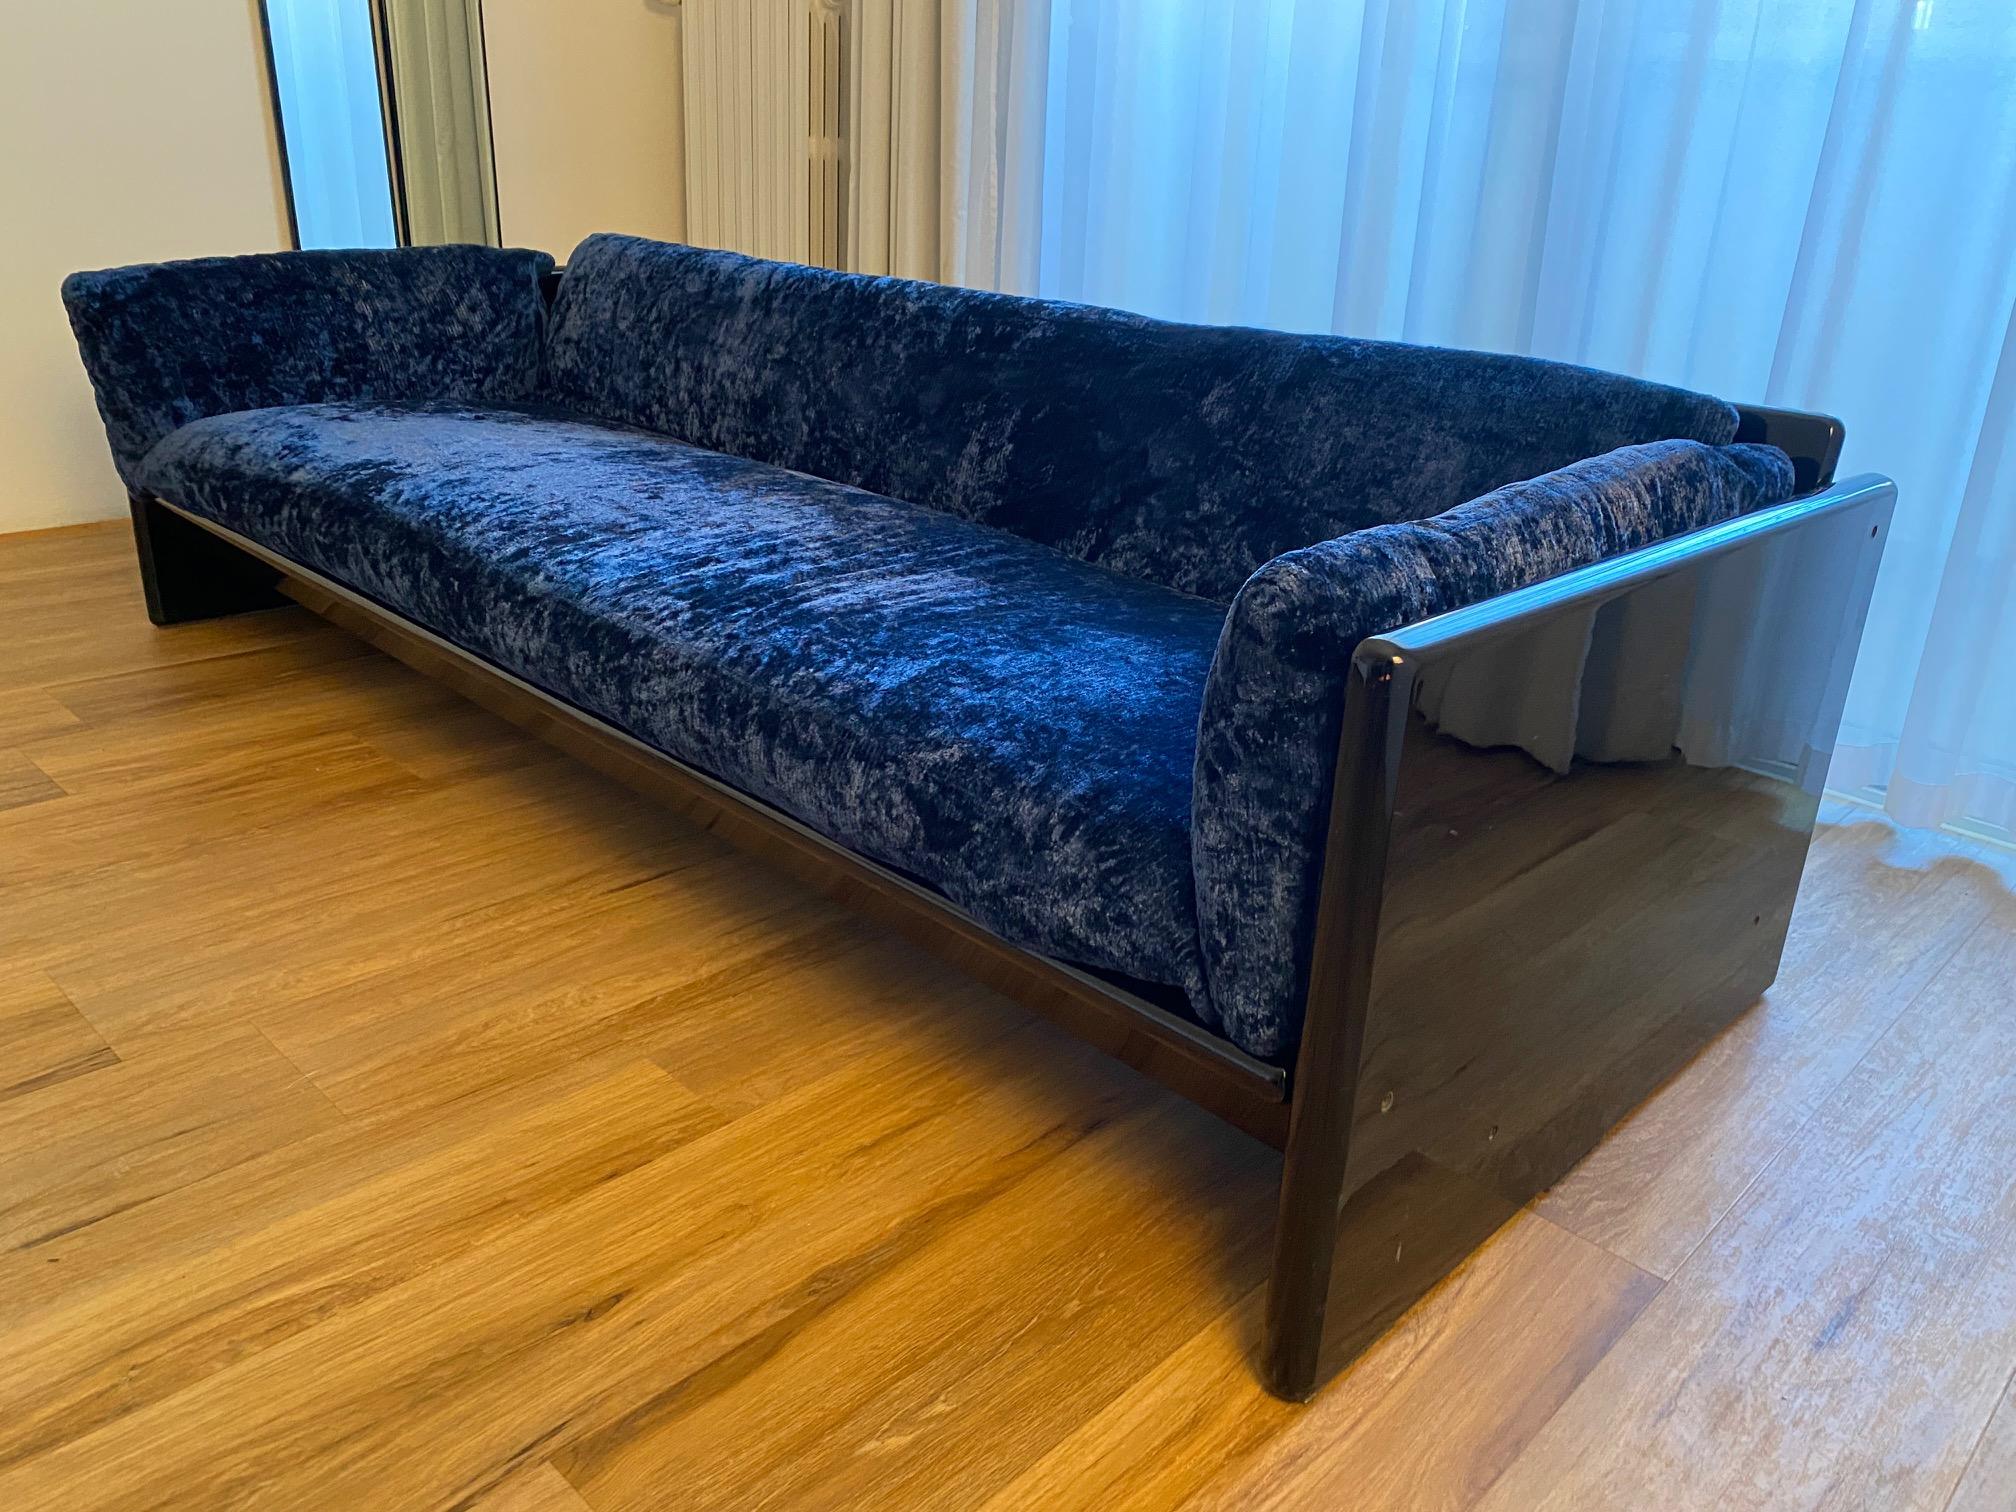 Simone' sofa by Dino Gavina in blue velvet for Studio Simon, 1971

It is one of the most interesting and scenographic models by Gavina, which we offer here in its original electric blue fabric of great beauty. The structure is in black lacquered